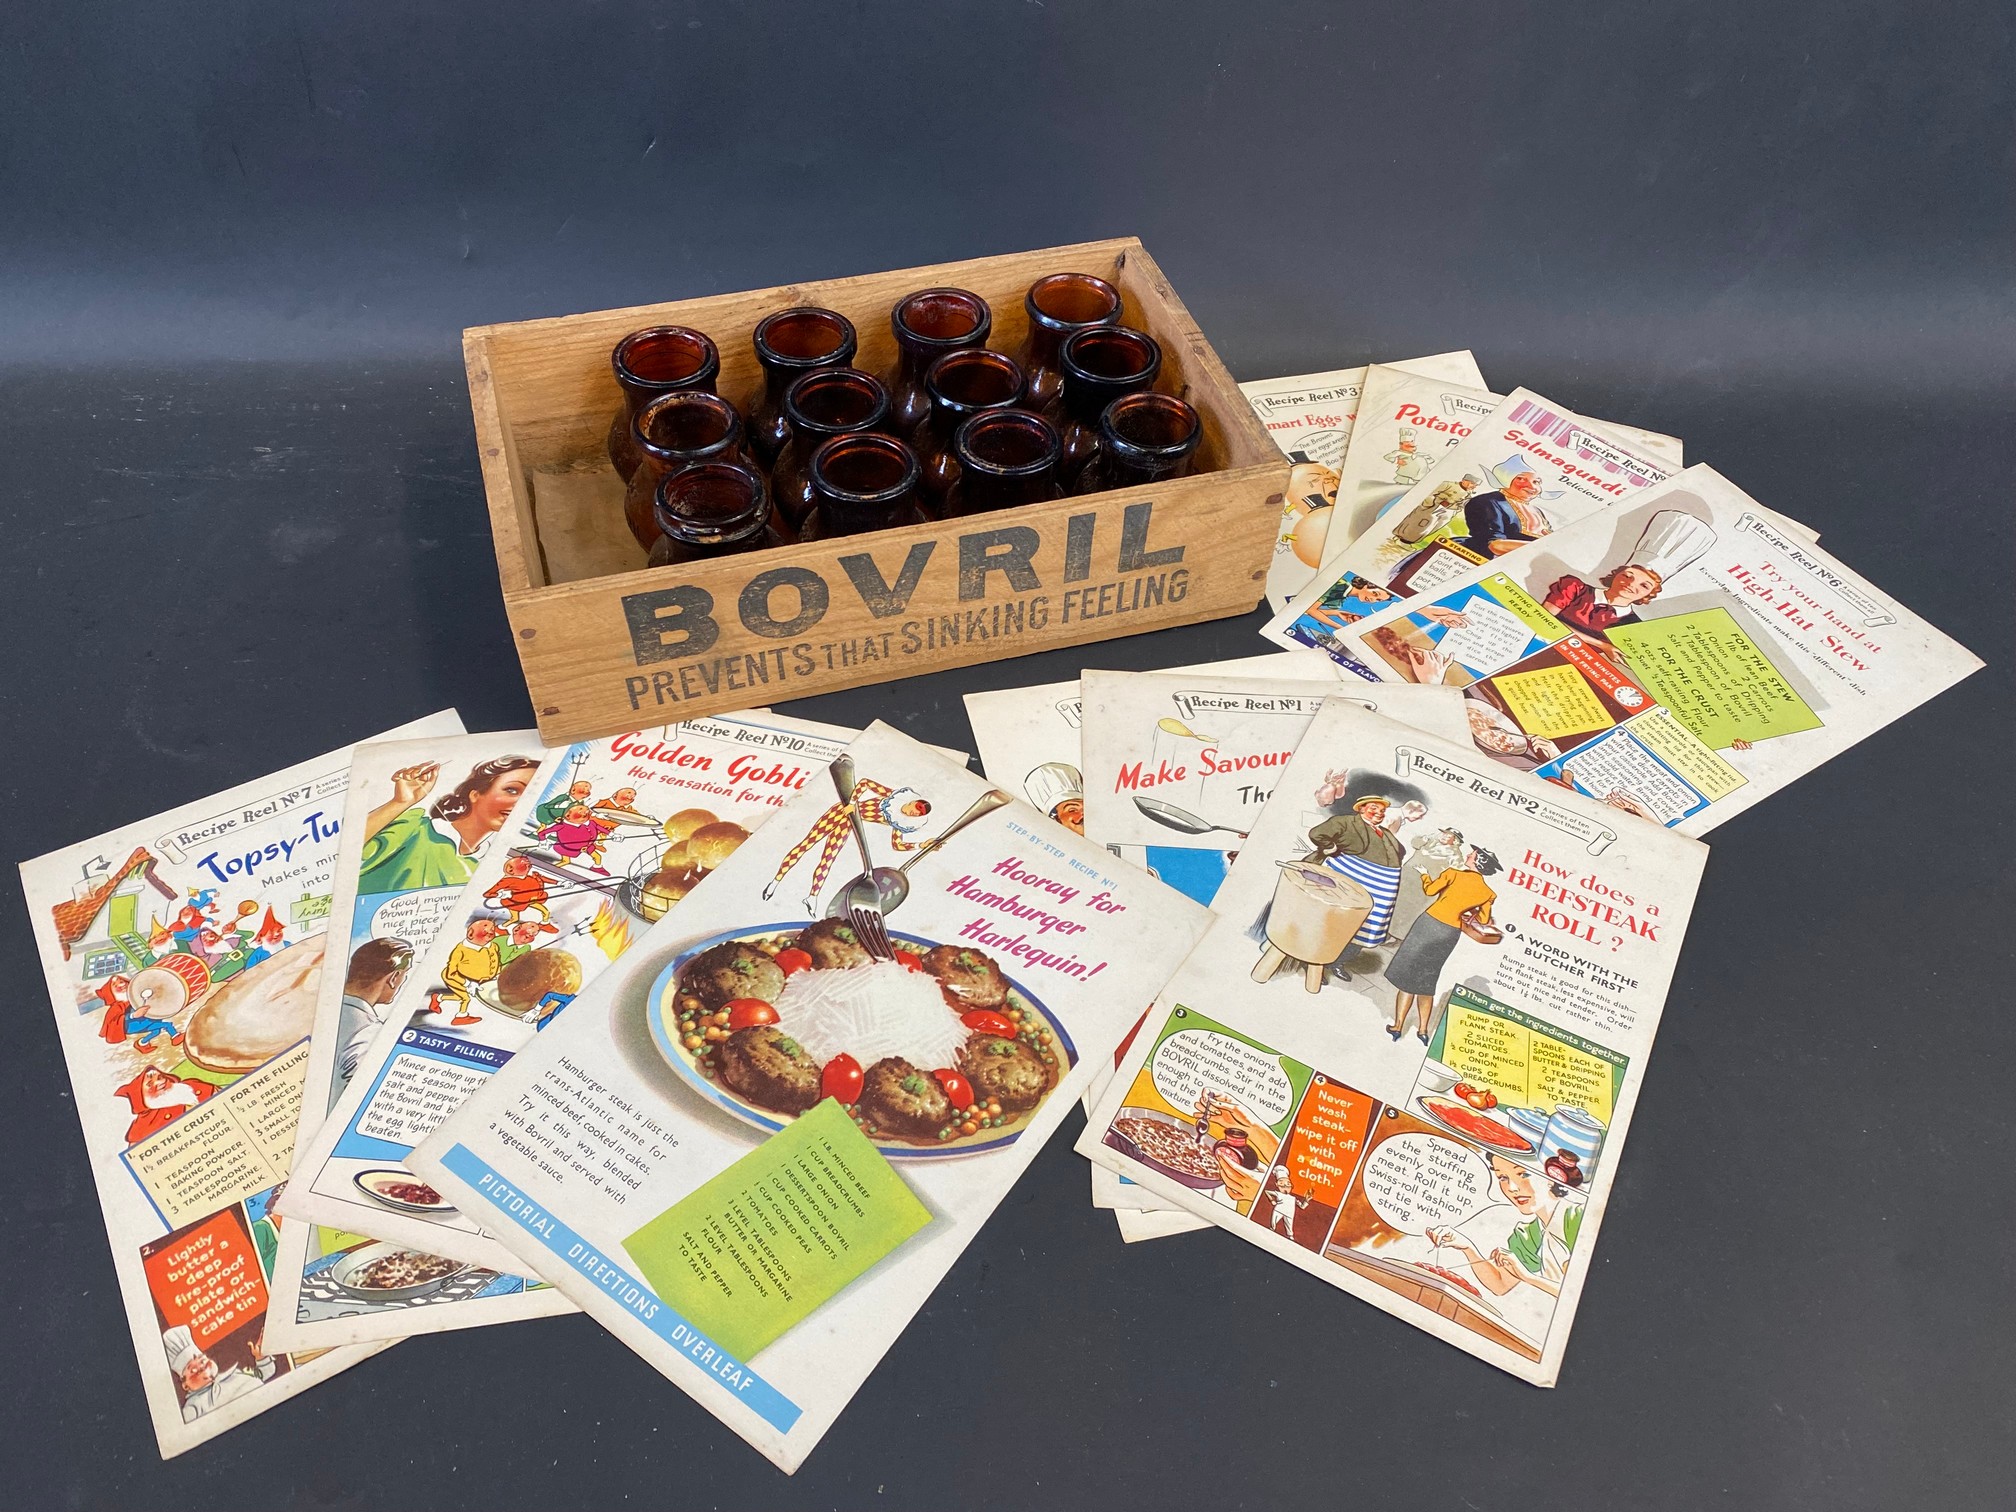 A Bovril wooden counter top box, 12 glass jars and various menu cards.